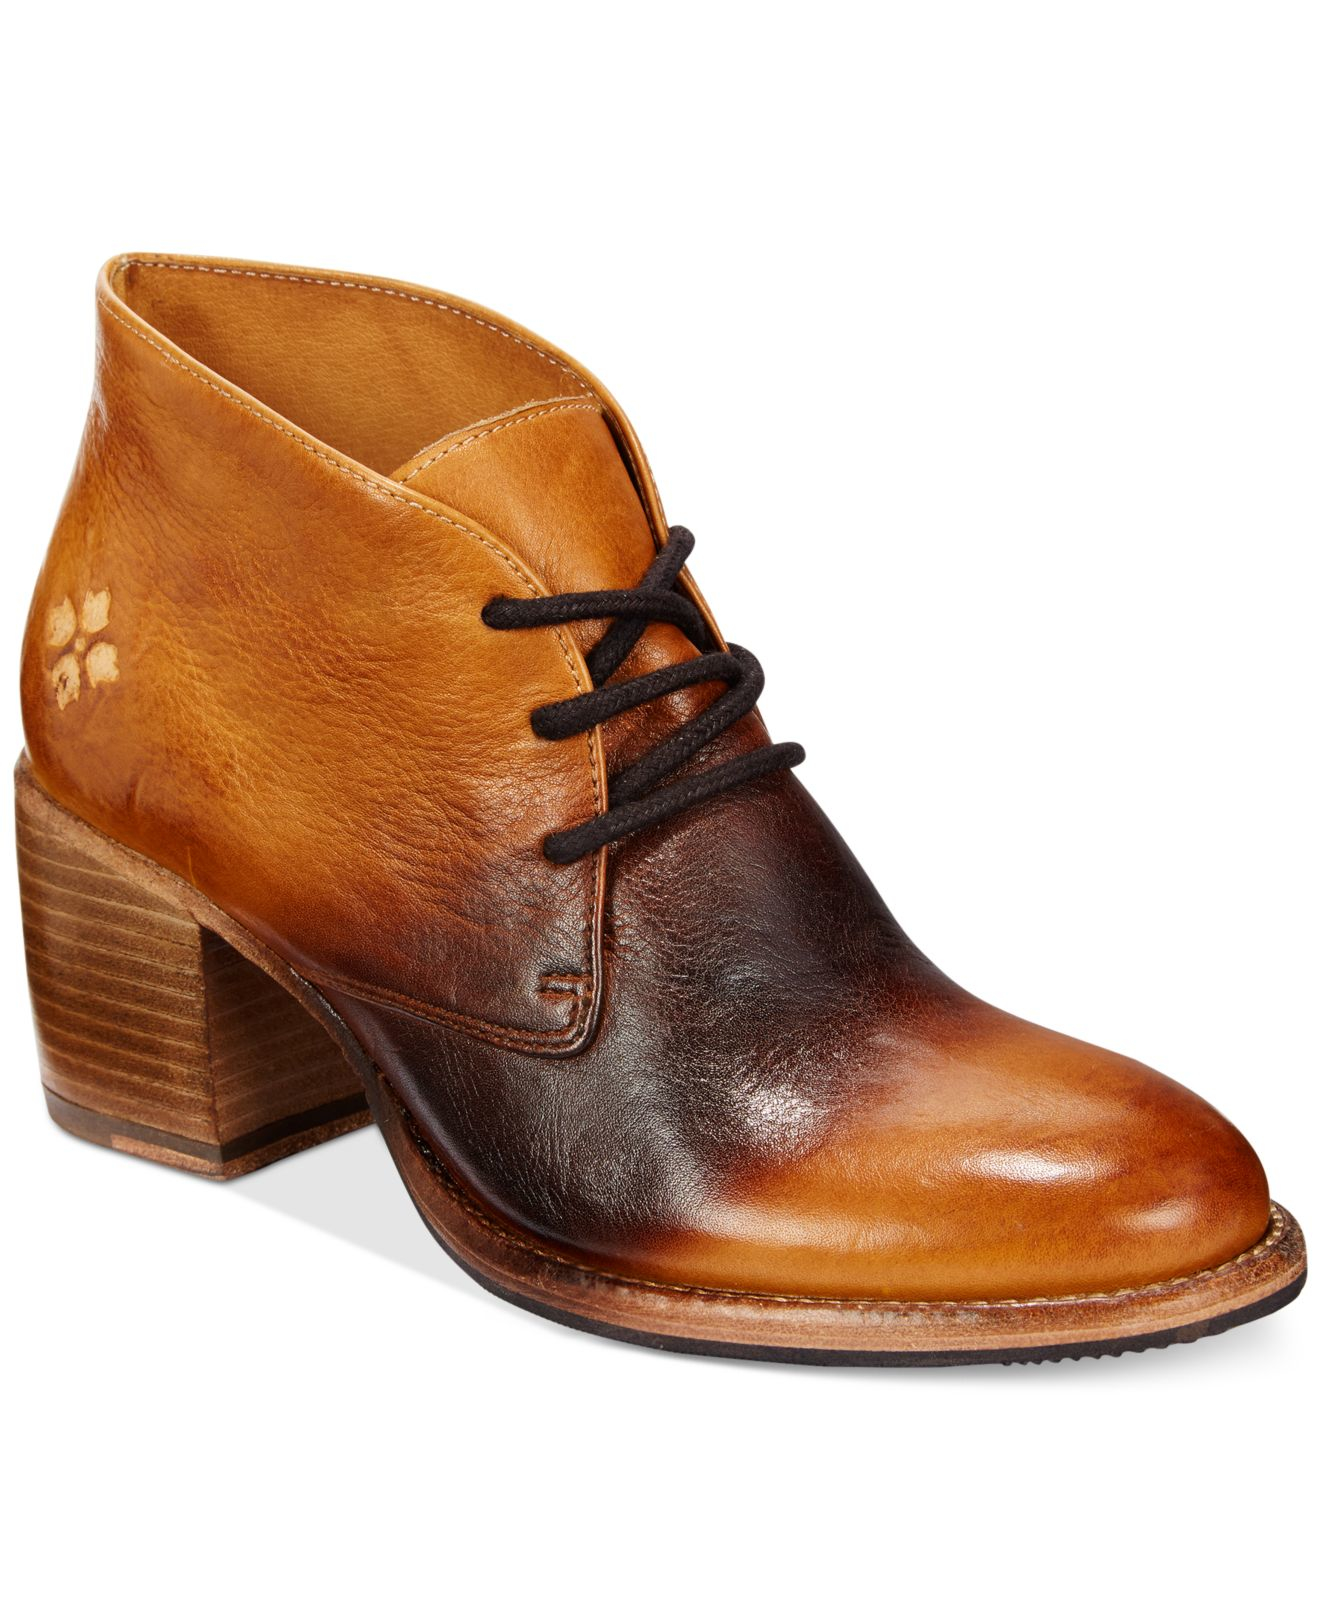 Lyst Patricia Nash Laceup Booties in Brown